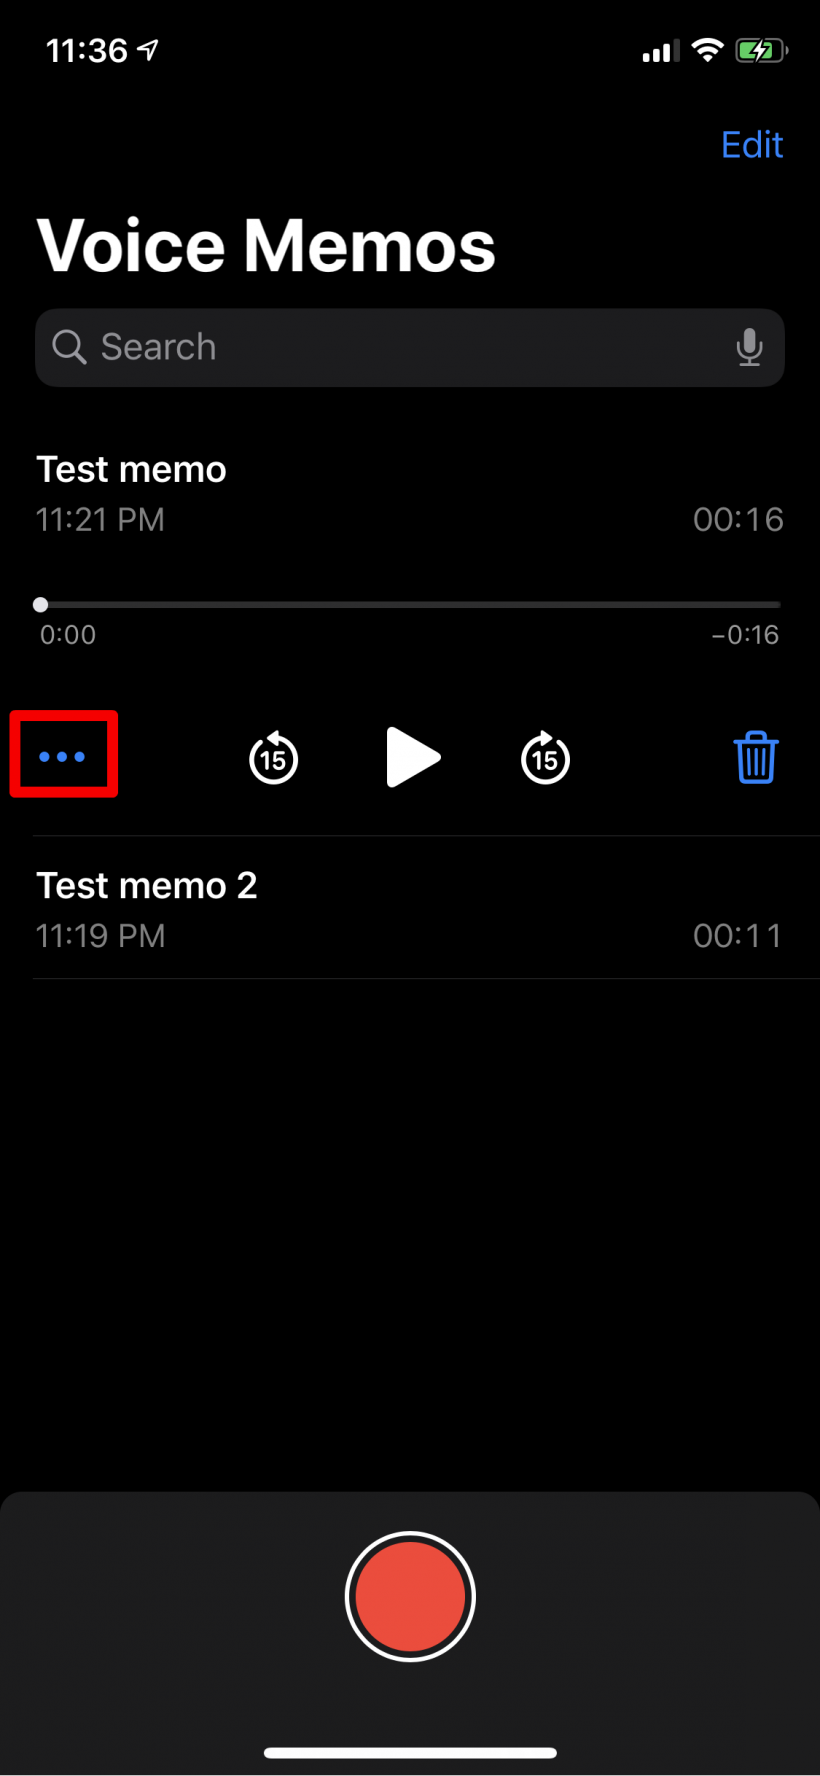 How do I share a voice memo on iPhone? | The iPhone FAQ